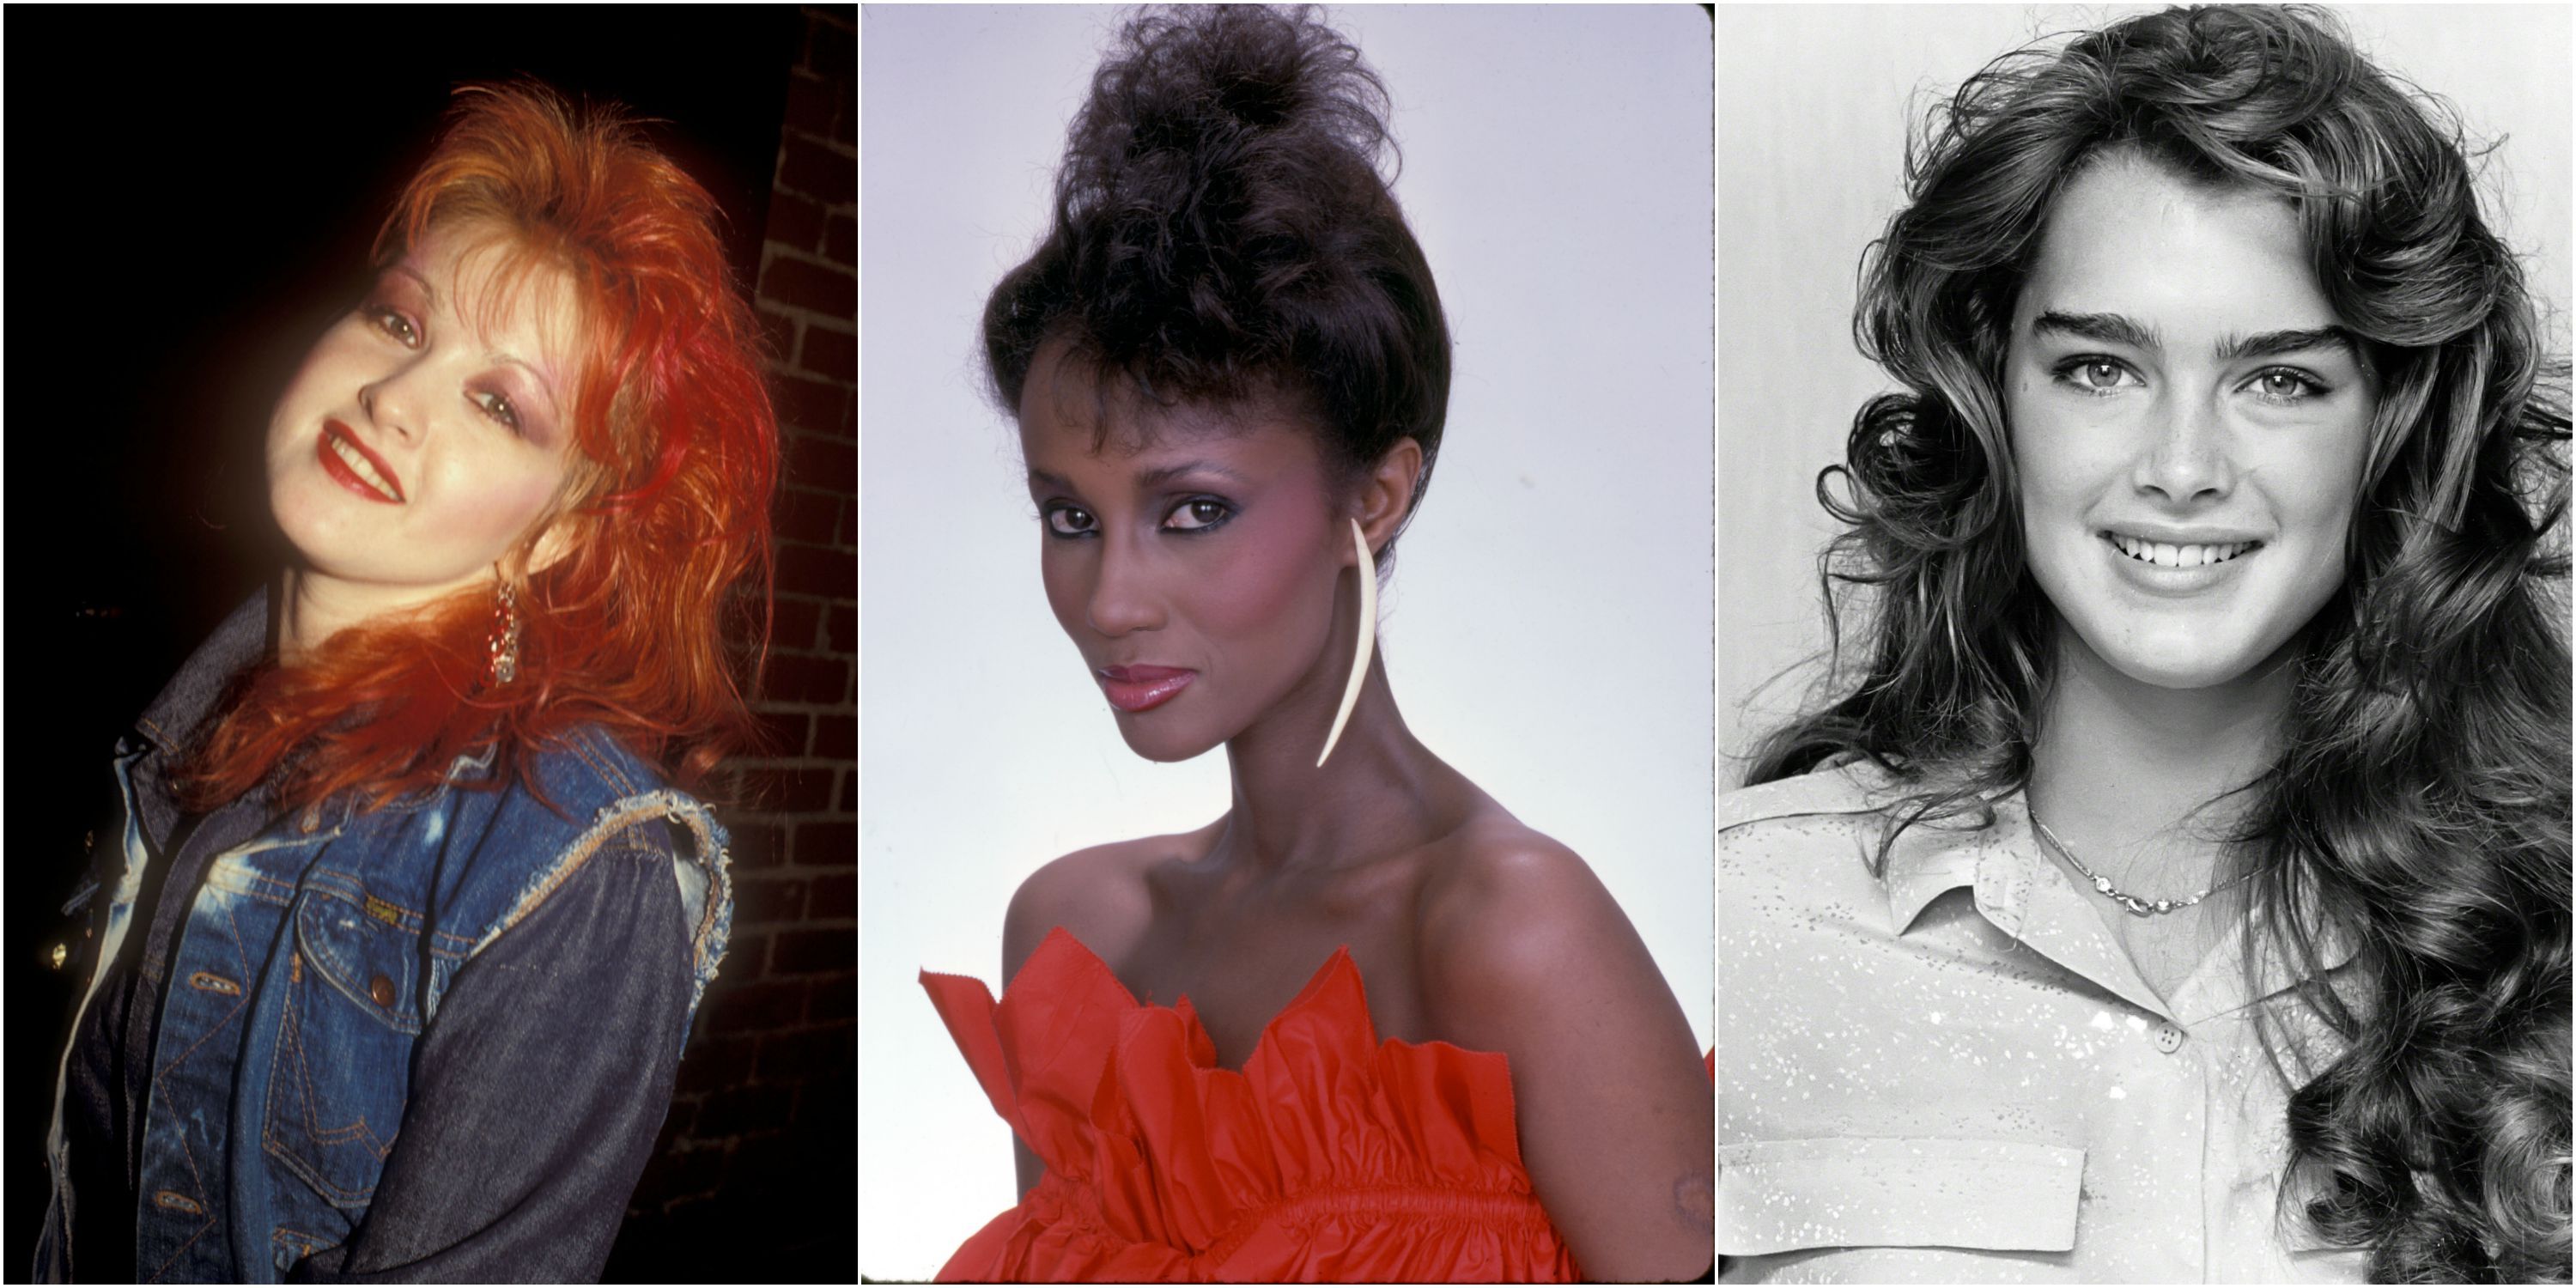 80s Hair and Makeup Trends That Are Back - 1980s Beauty Trends